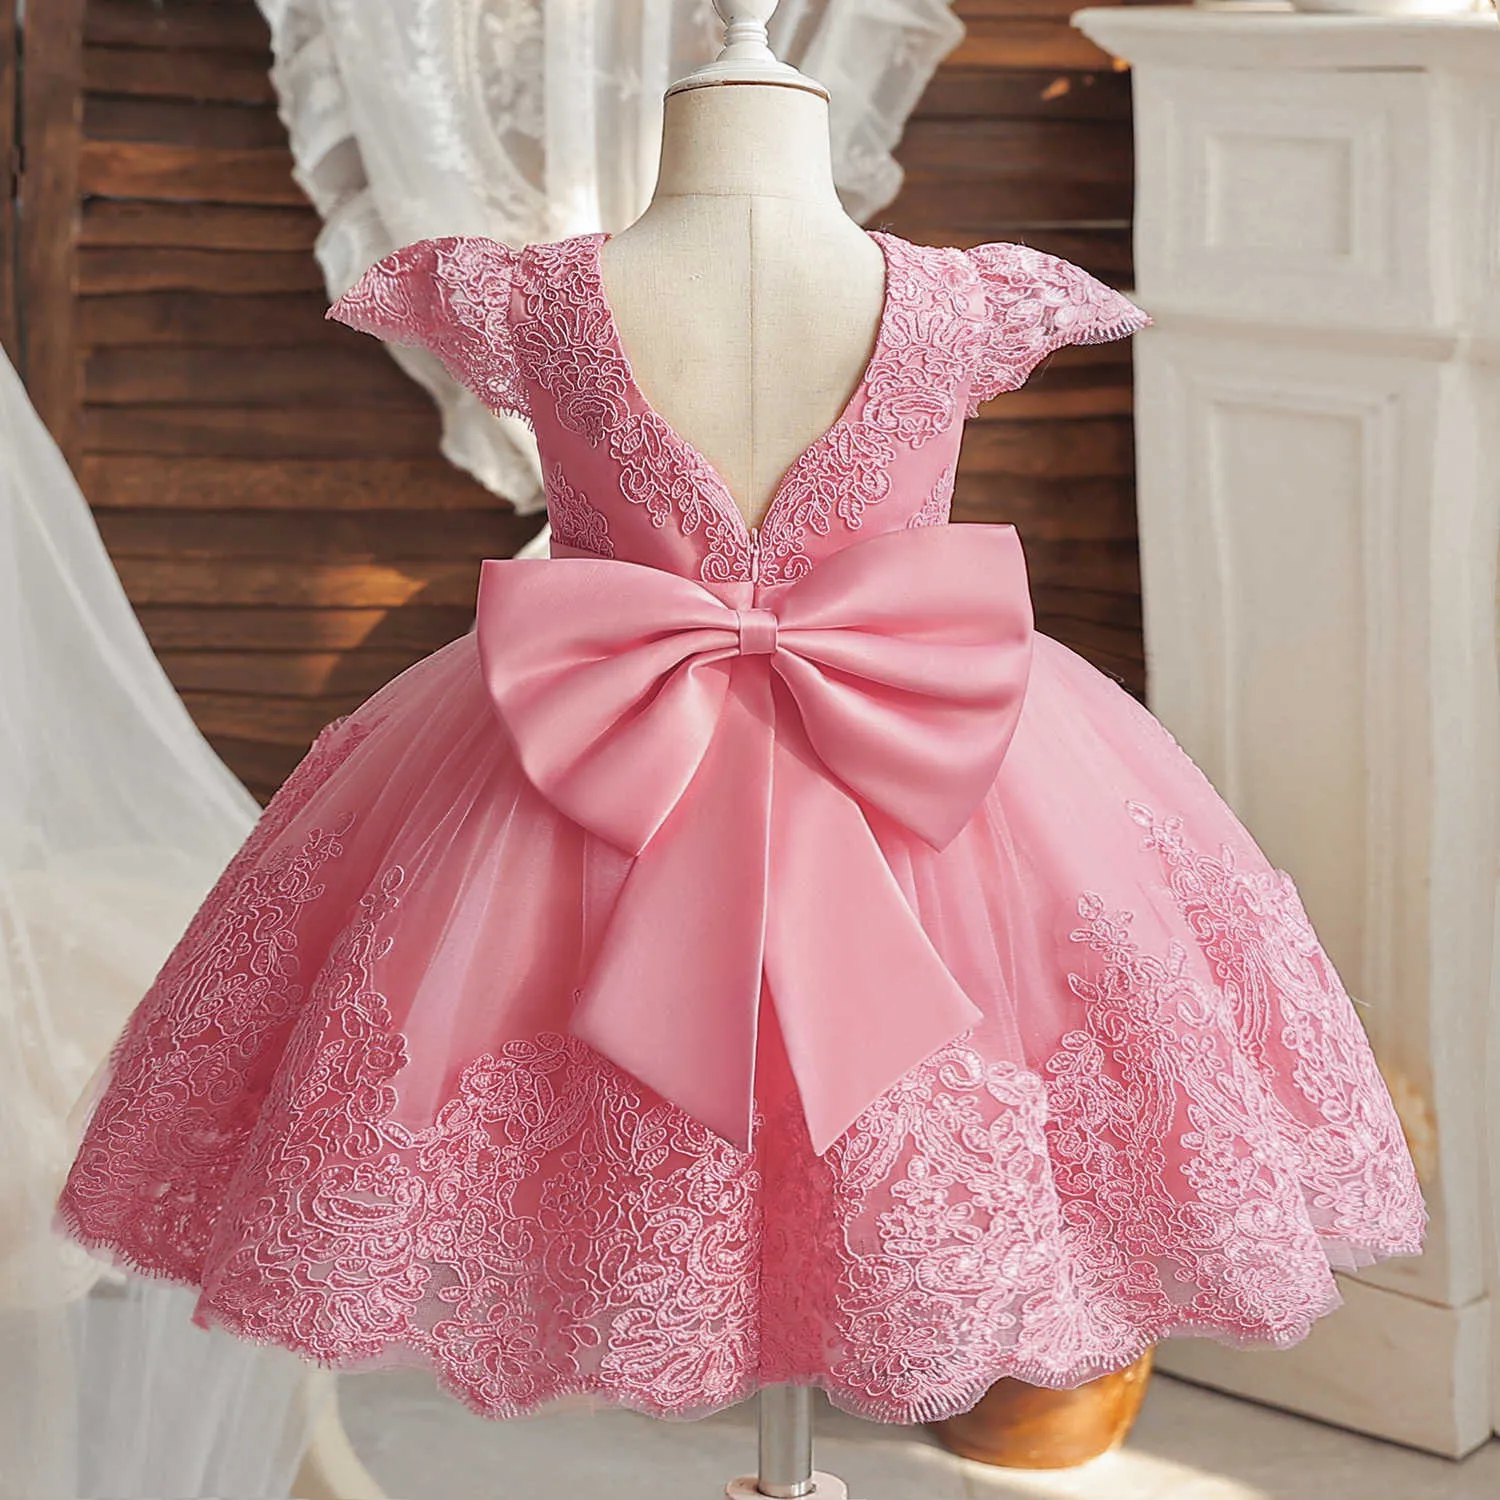 Girl Sequins Pearl Princess Party Dress Baby Girl Formal Dresses | Girls  formal dresses, Kids party dresses, Baby girl party dresses